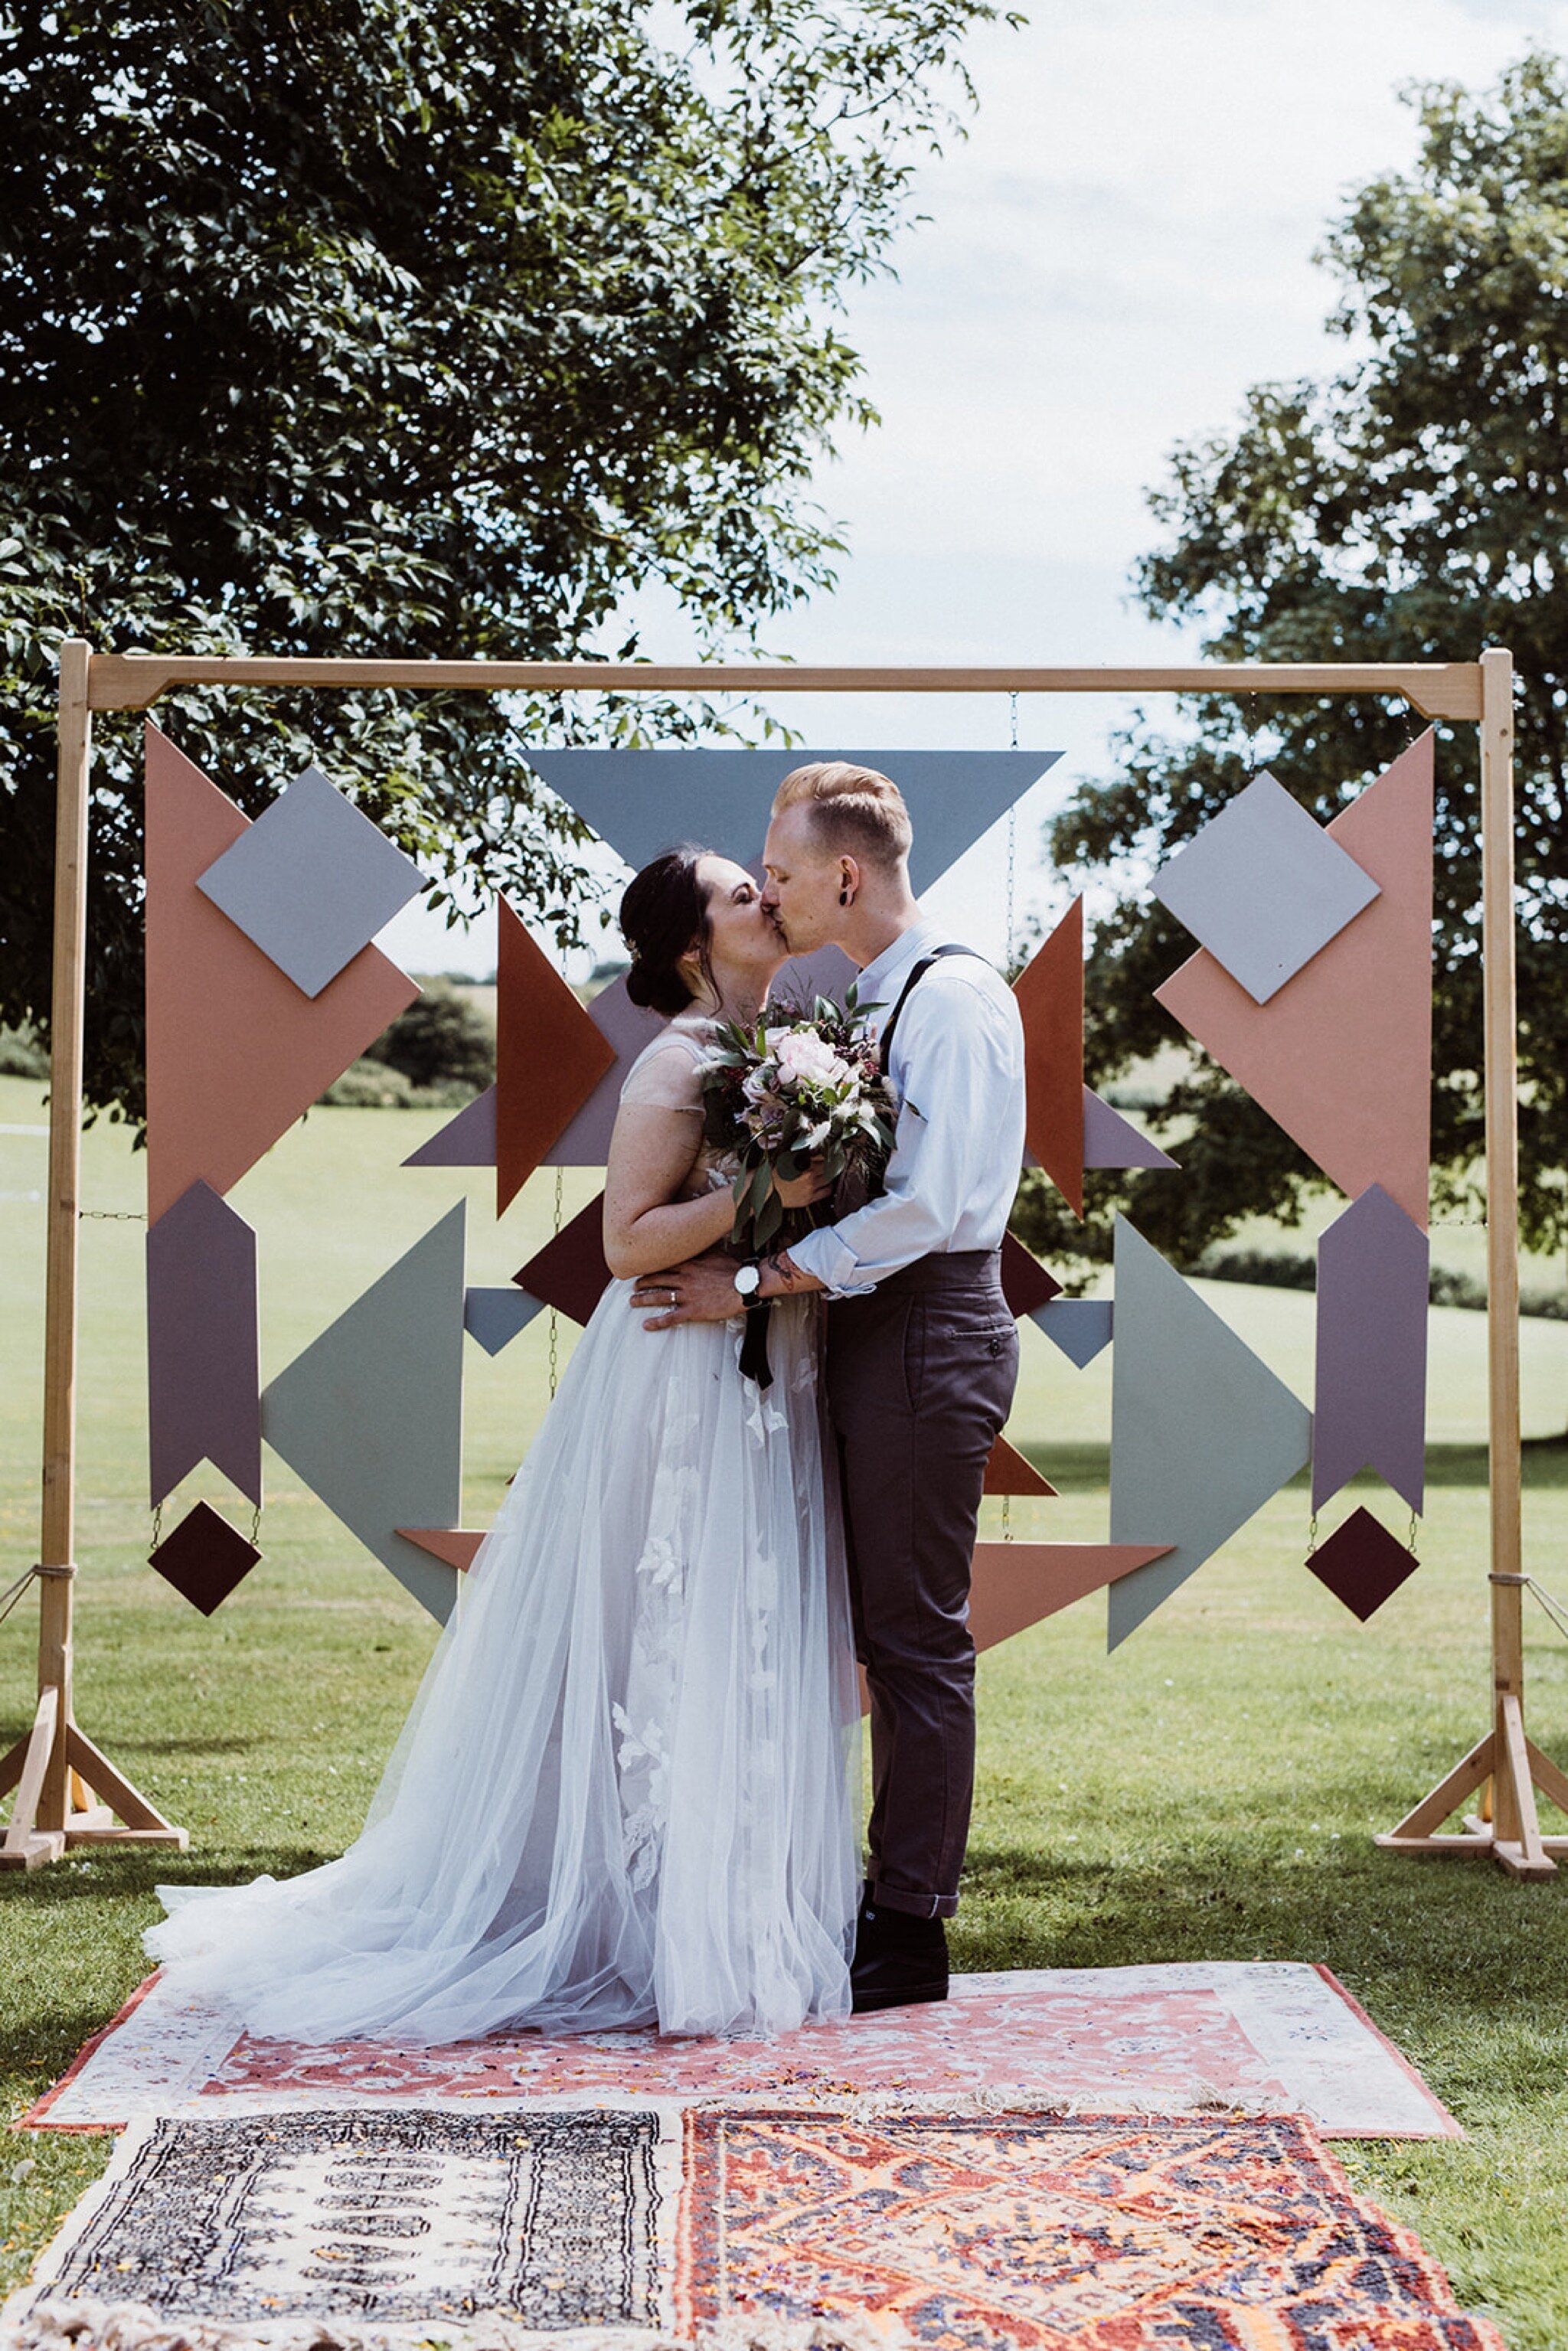 18_V+D Wedding-385_Bride and groom kissing in front of geometric wedding arch Summer outdoor humanist wedding ceremony..jpg